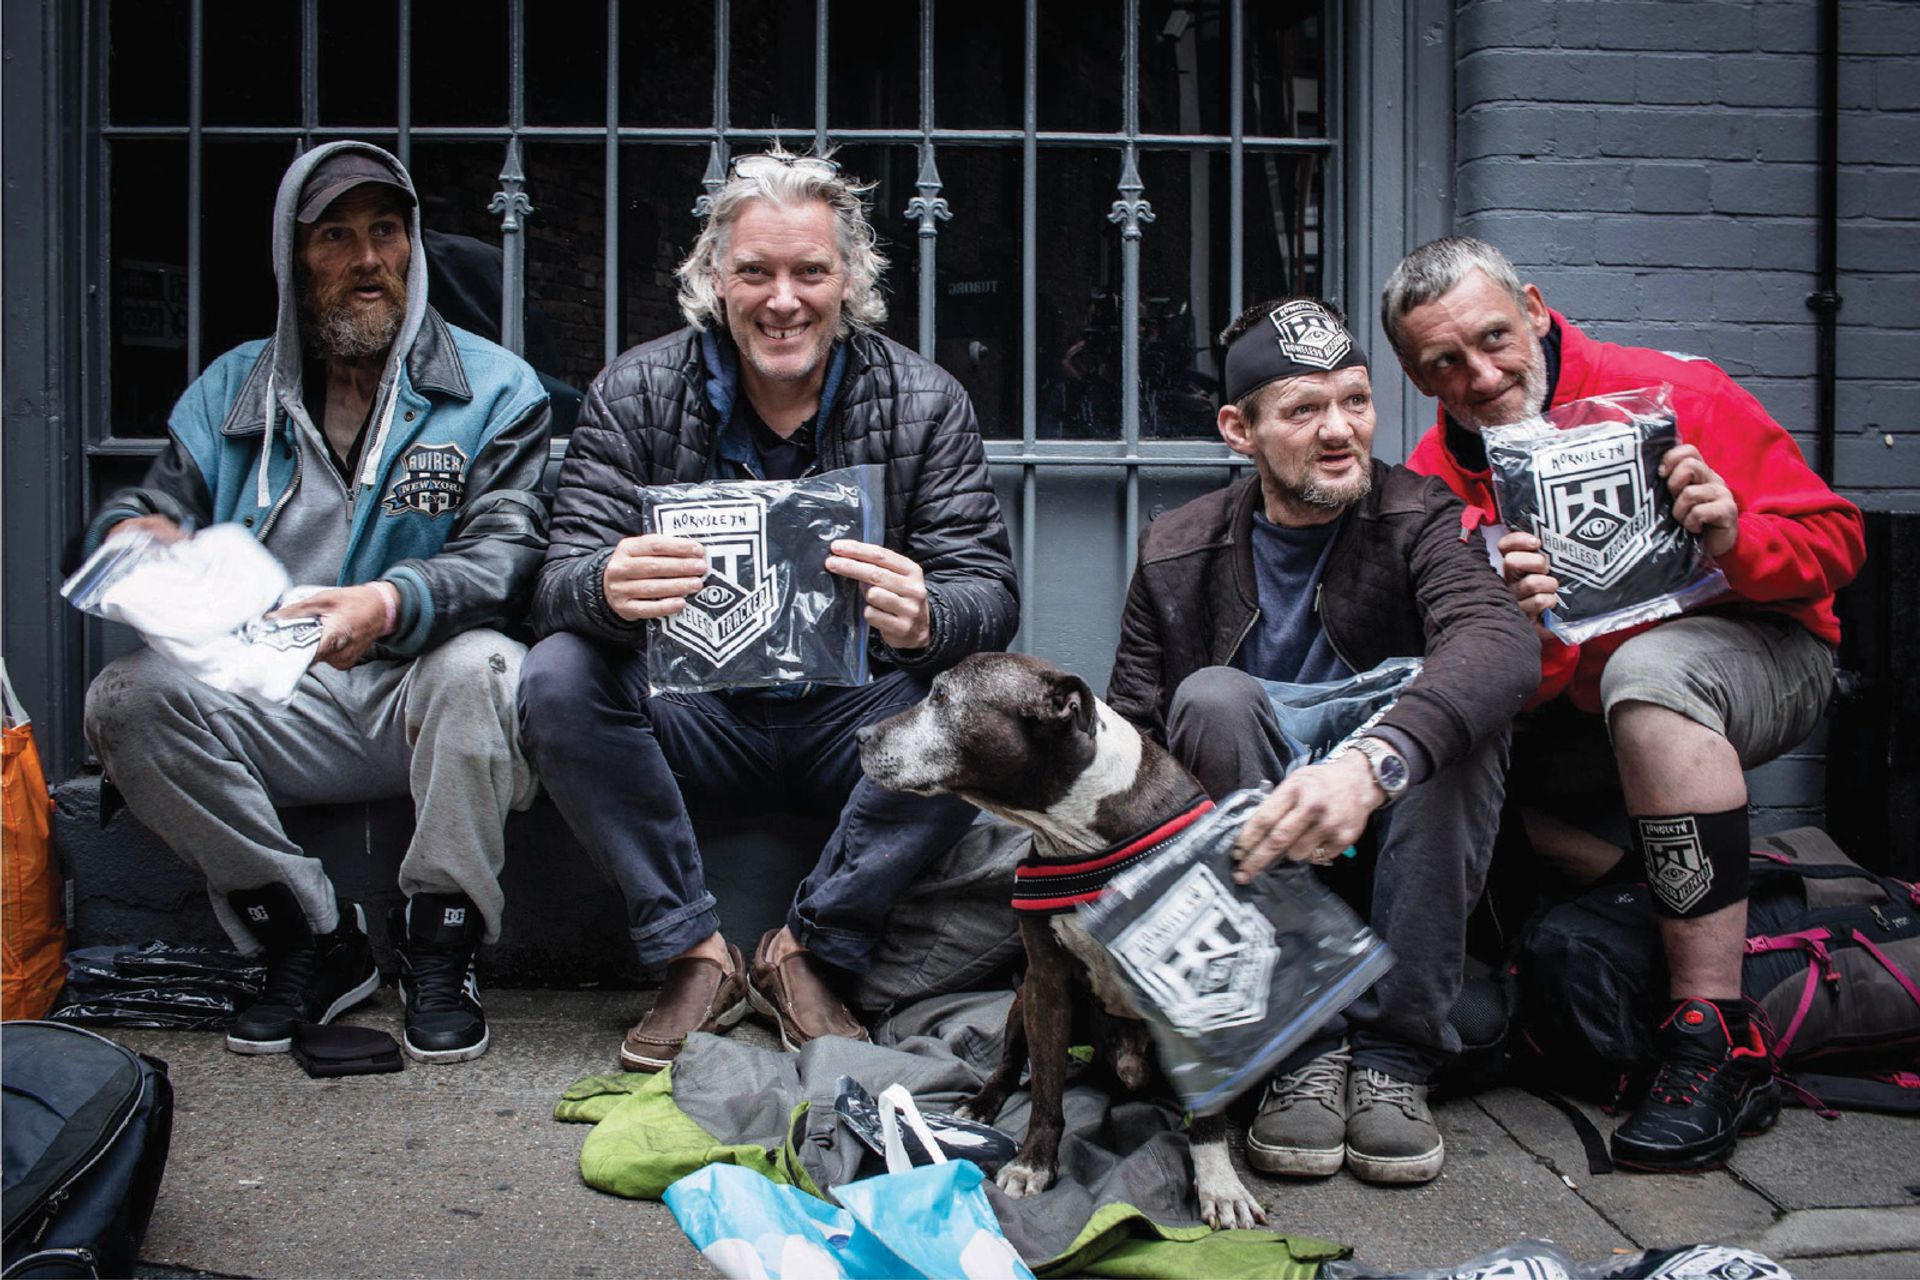 Homeless Londoners were fitted with tracking devices by Kristian von Hornsleth (second left) before being “followed” by art collectors © Arko Hojholt